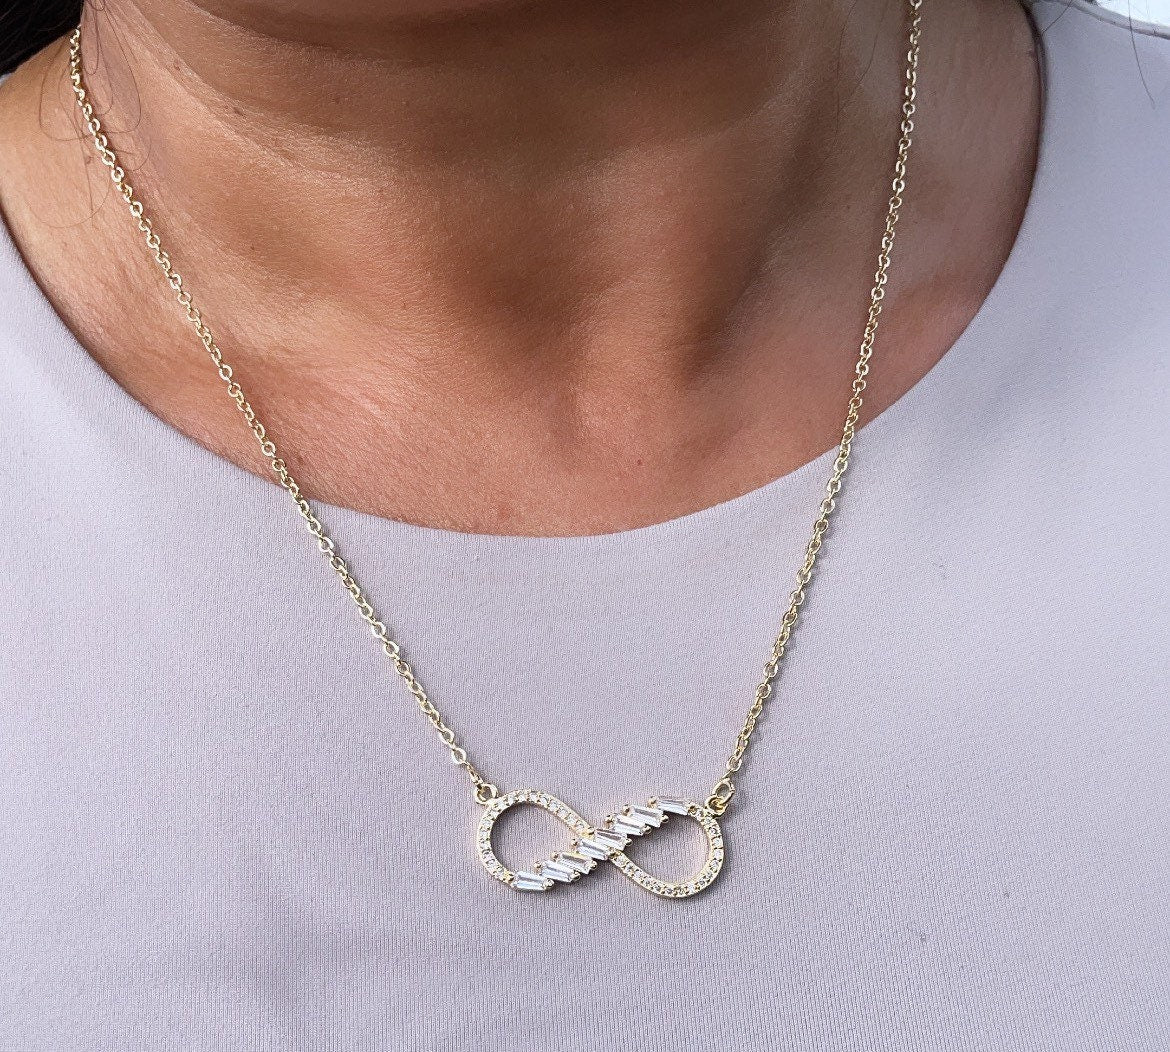 18k Gold Layered Infinity Baguete And Micro Pave Zirconia Set Necklace And